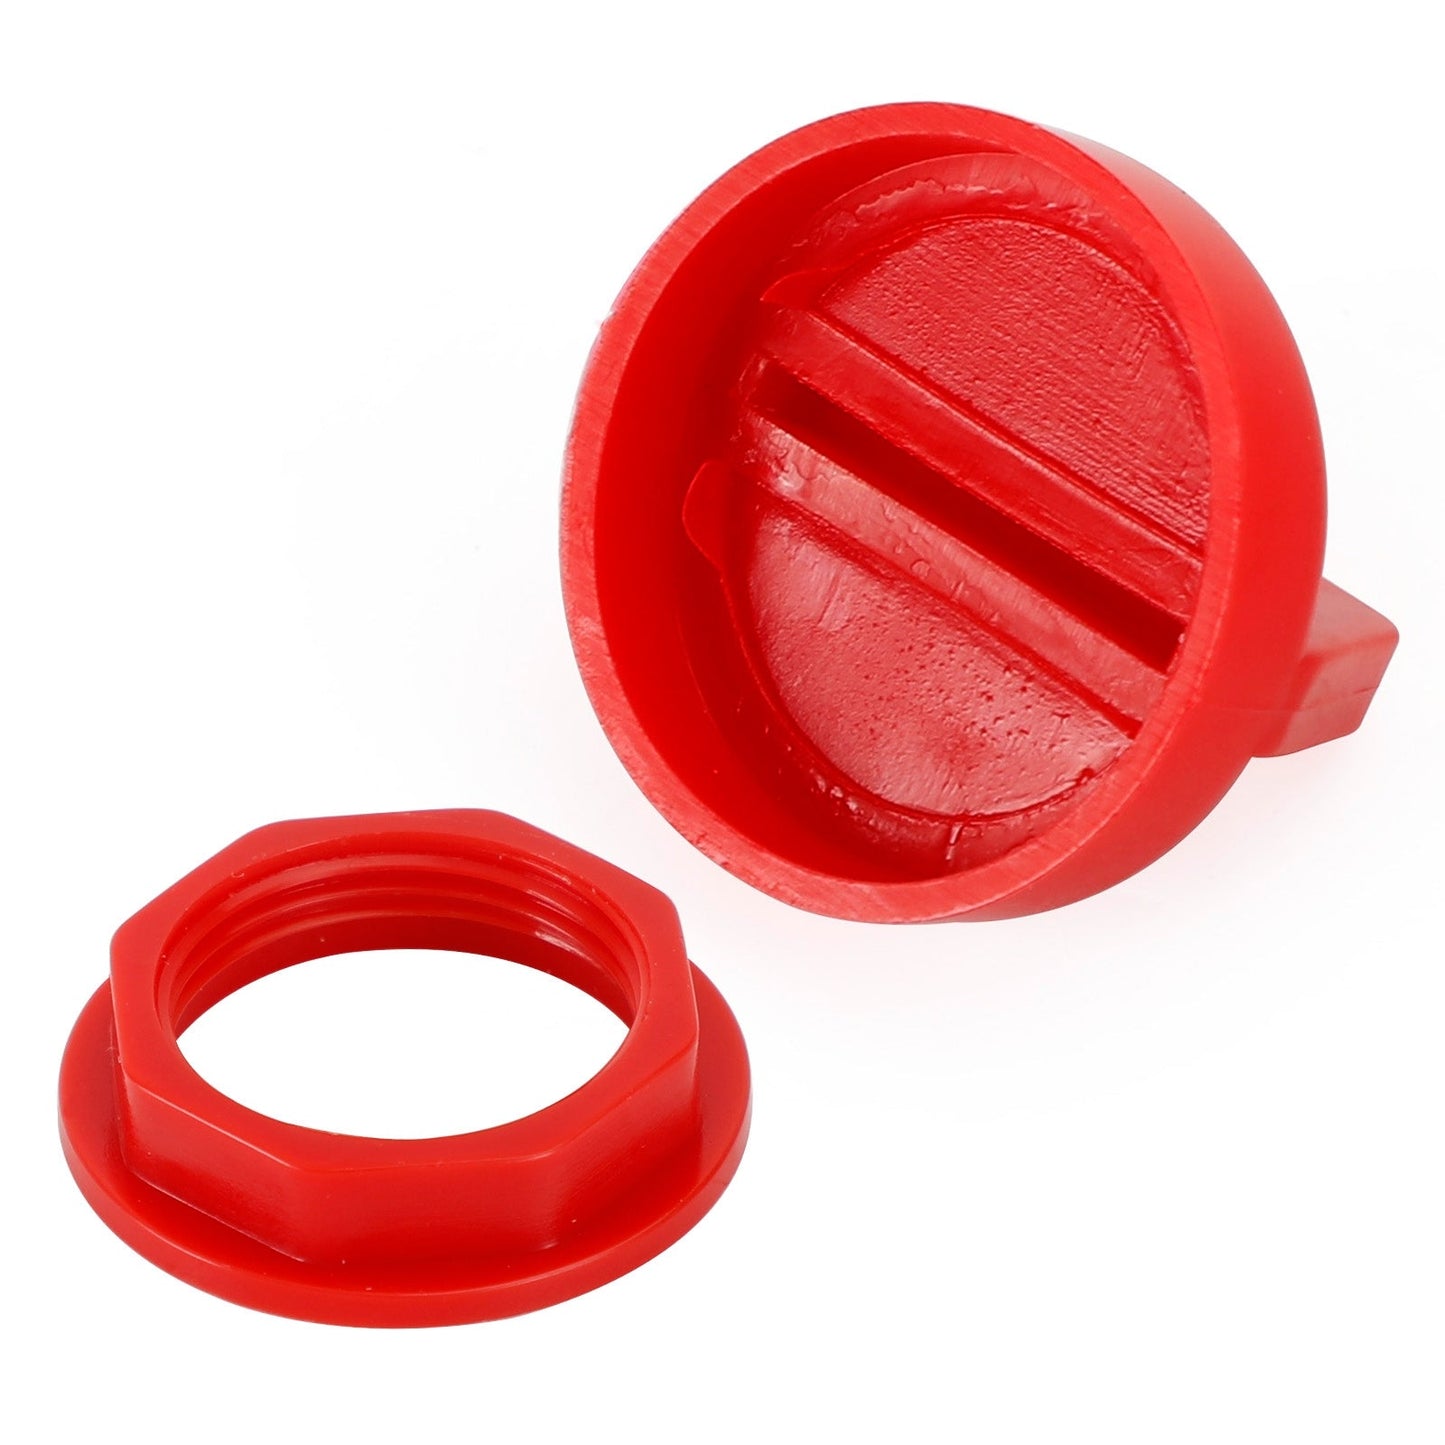 2 Pack Red Ignition Key Cover w/Nut For Polaris RZR XP 570 800 900 1000 5433534